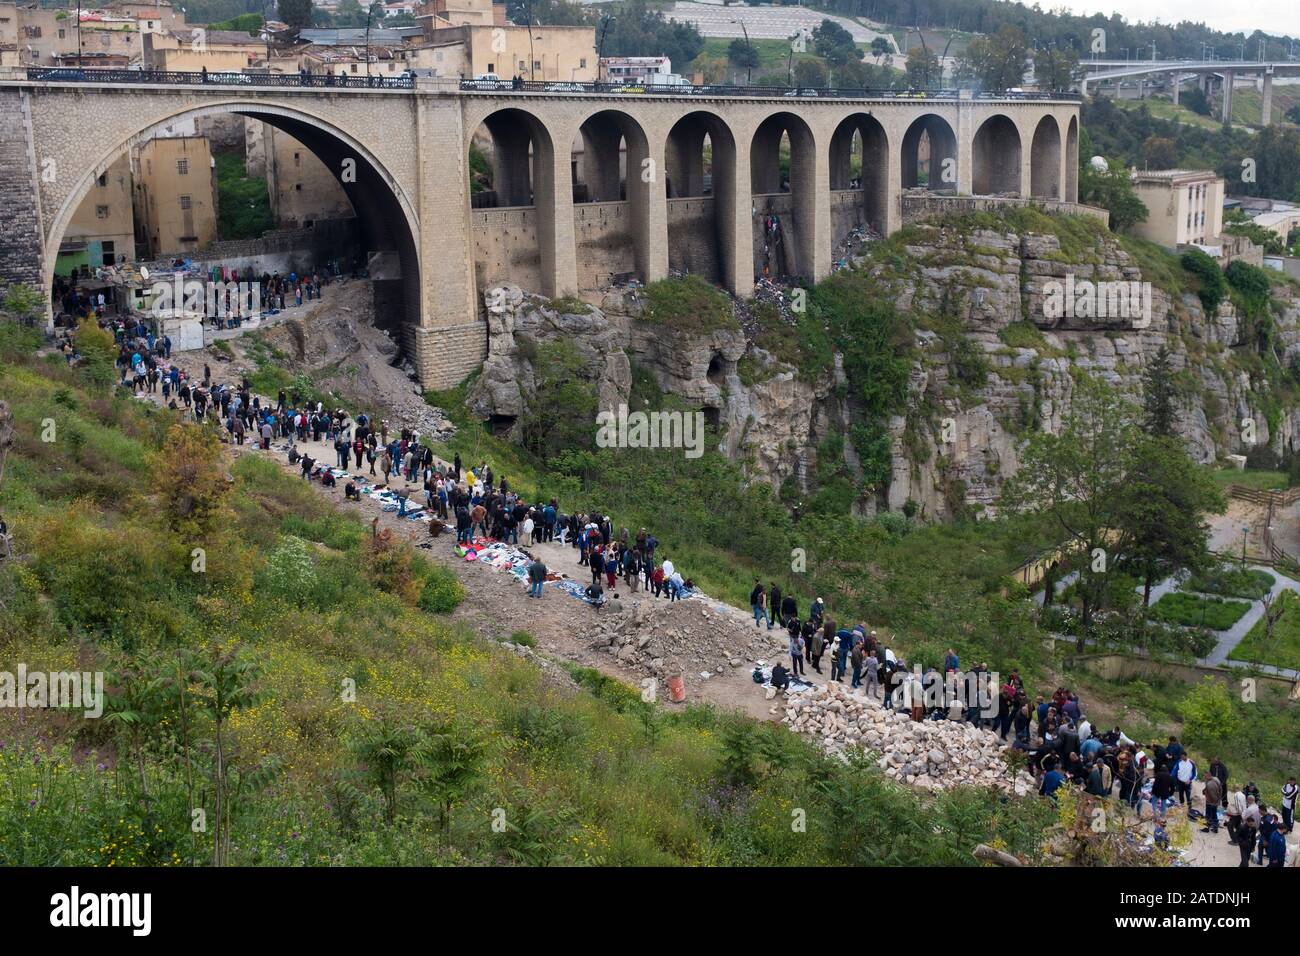 An informal market underneath The Sidi Rached Viaduct allows locals to buy and sell cheaply in Constantine, Northern Algeria. Stock Photo